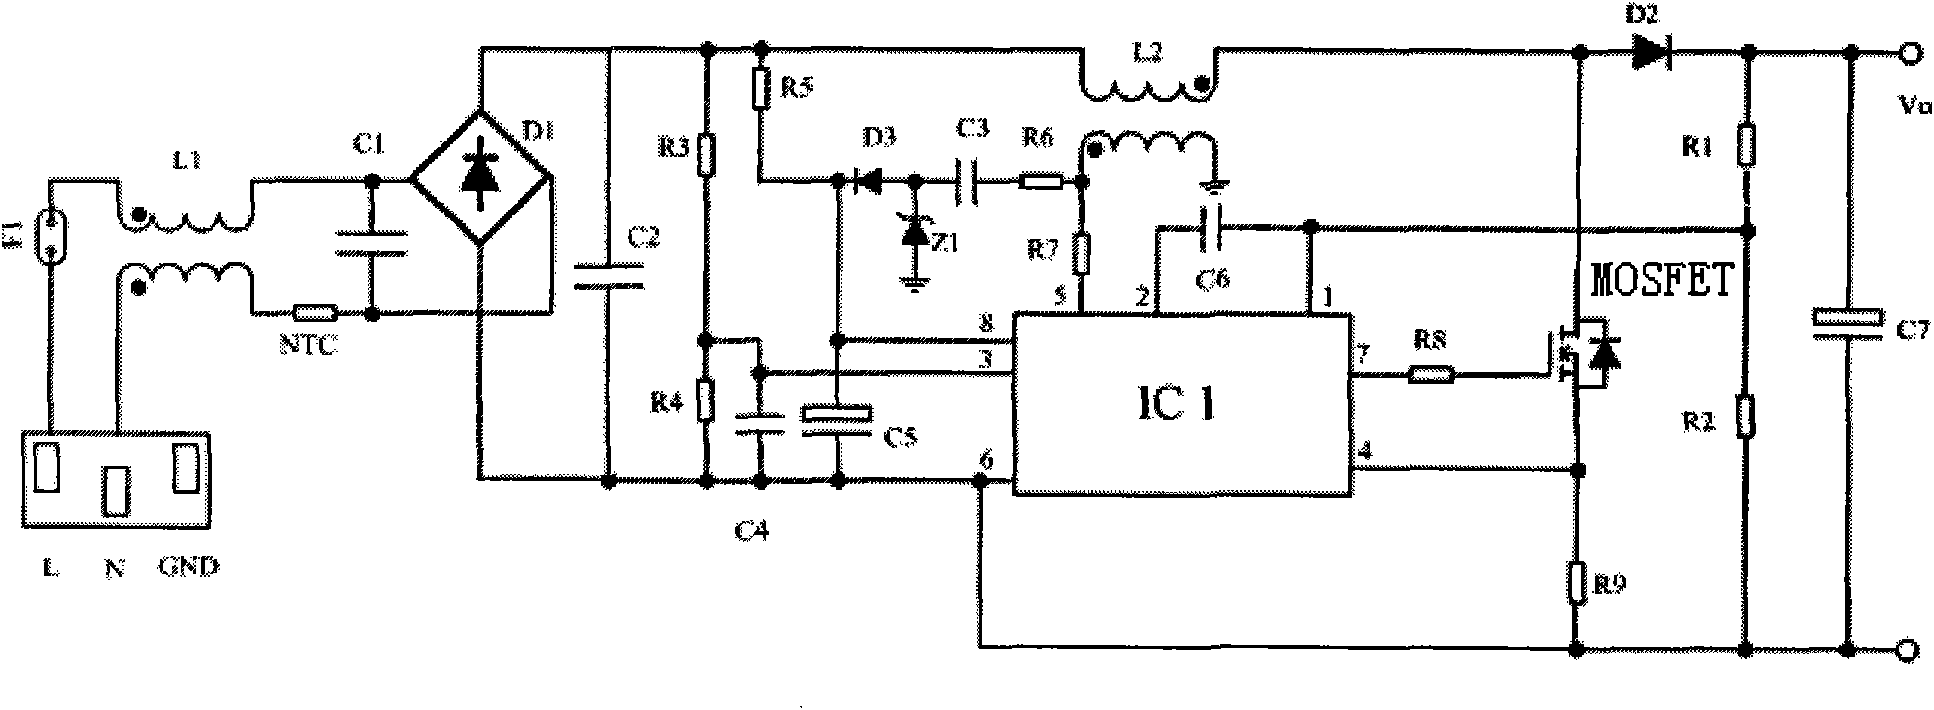 Multiplier and power factor correction controller with same